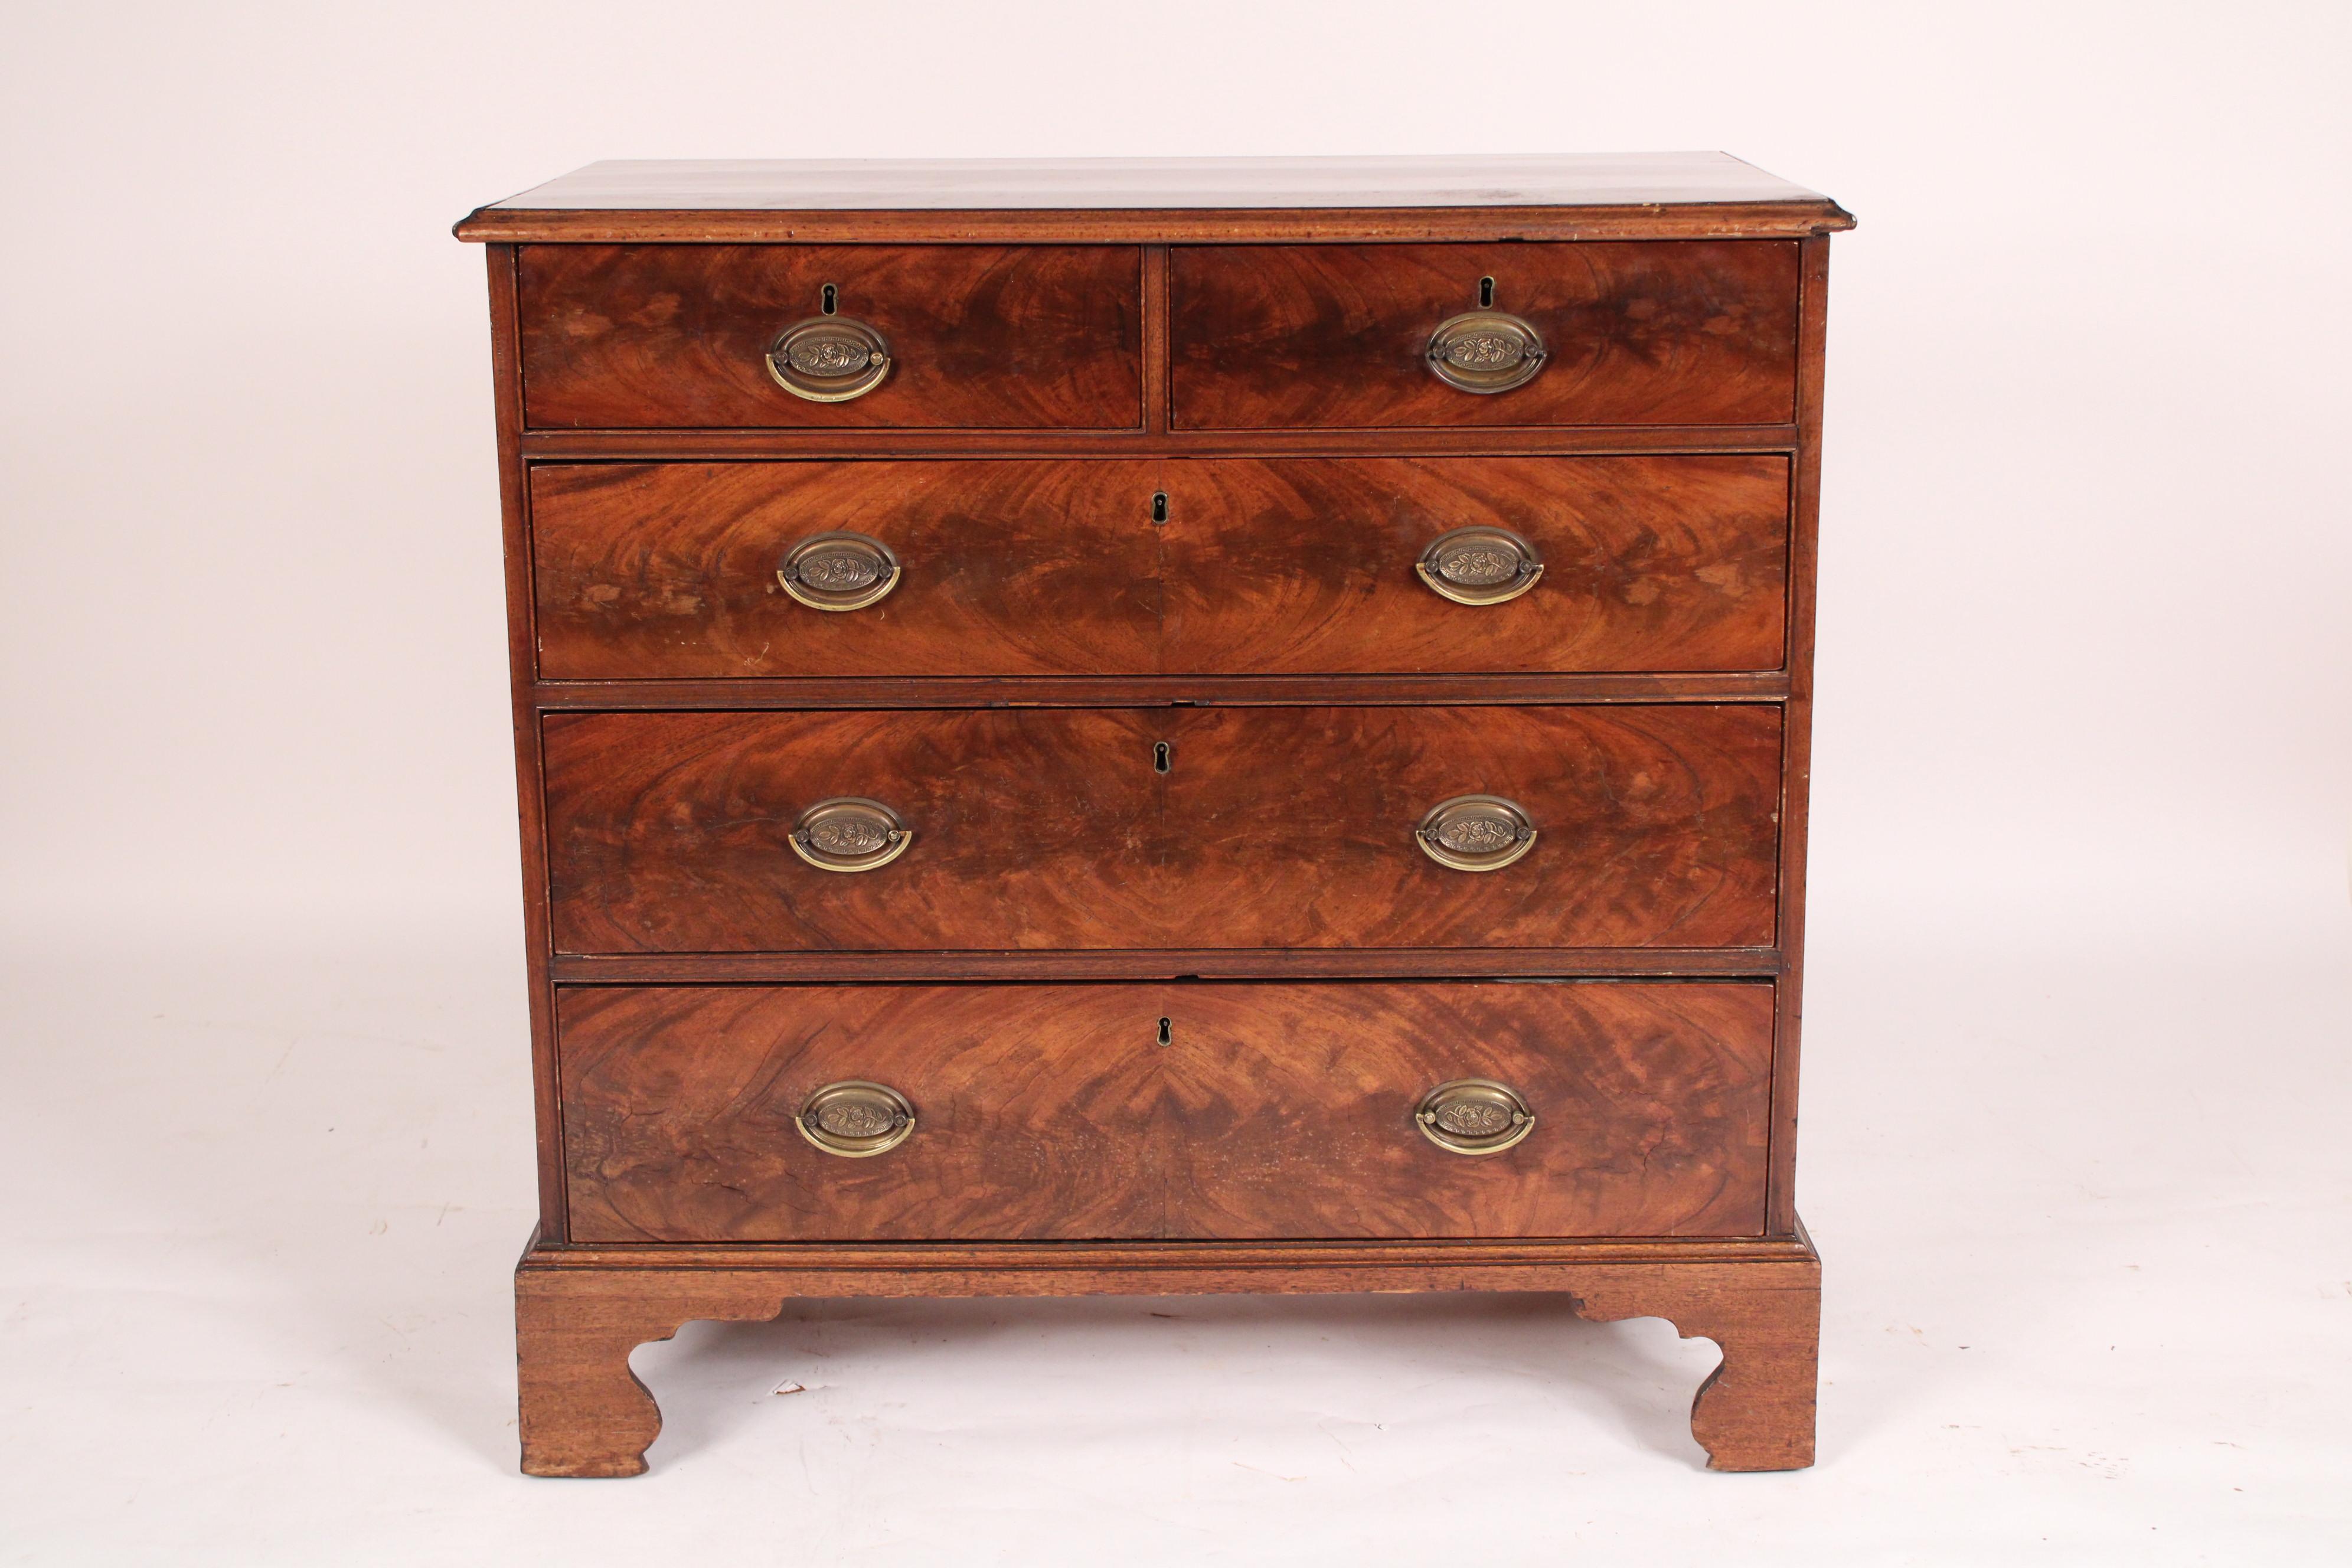 George III flame mahogany and mahogany chest of drawers, circa 1800. With a single board mahogany top with thumb molded front and side edges, two flame mahogany top drawers above 3 flame mahogany graduated bottom drawers, single board mahogany